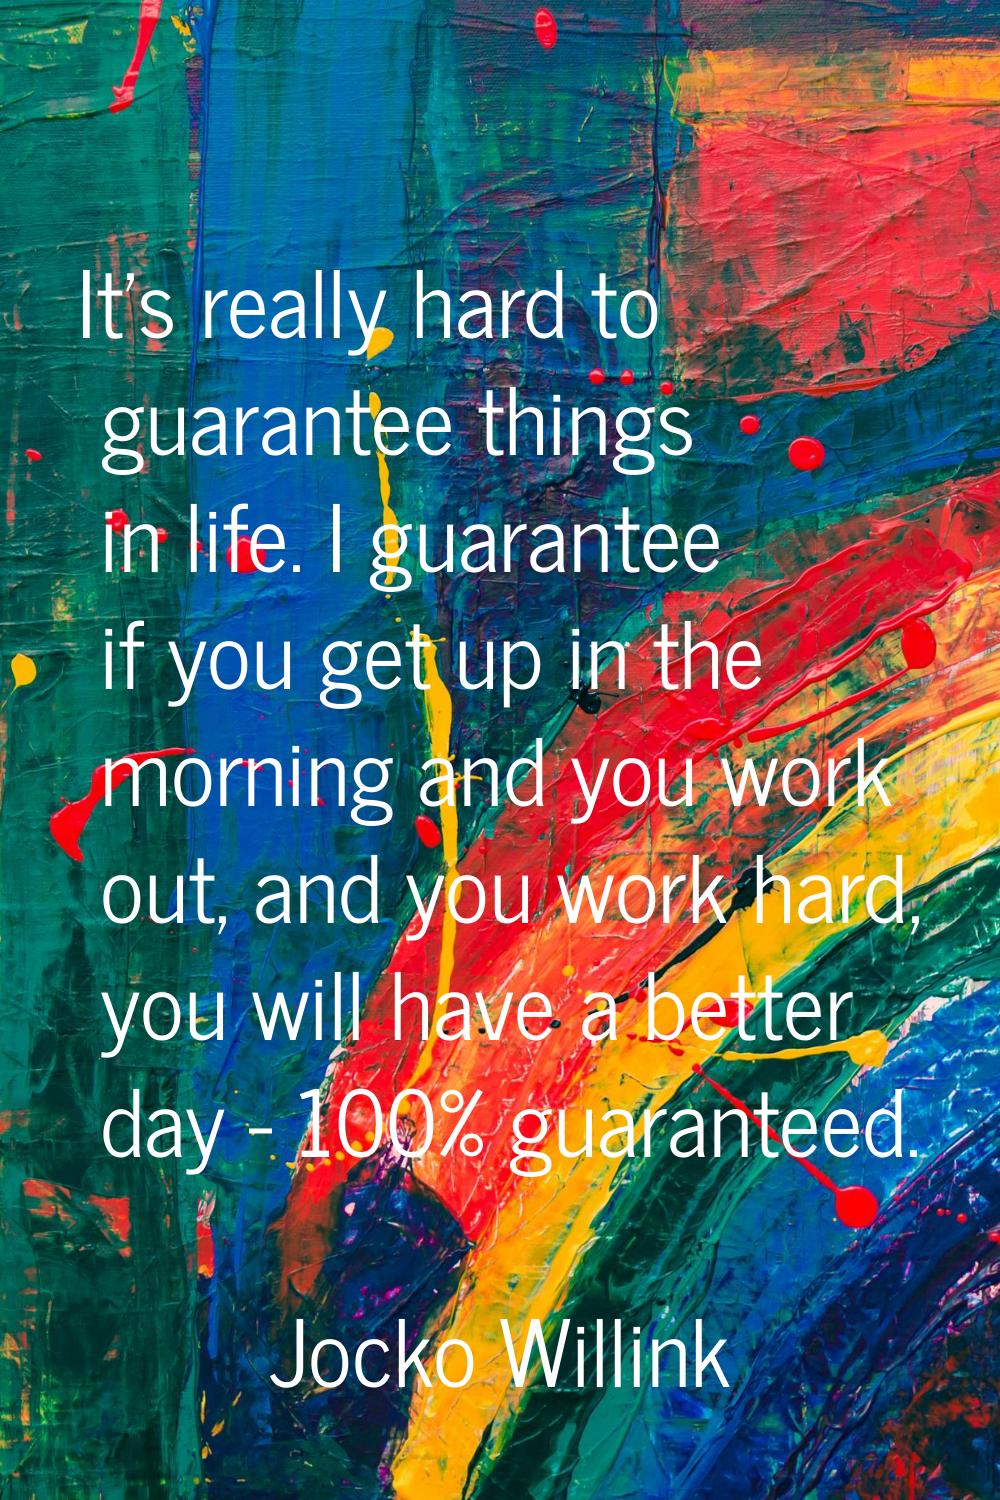 It's really hard to guarantee things in life. I guarantee if you get up in the morning and you work